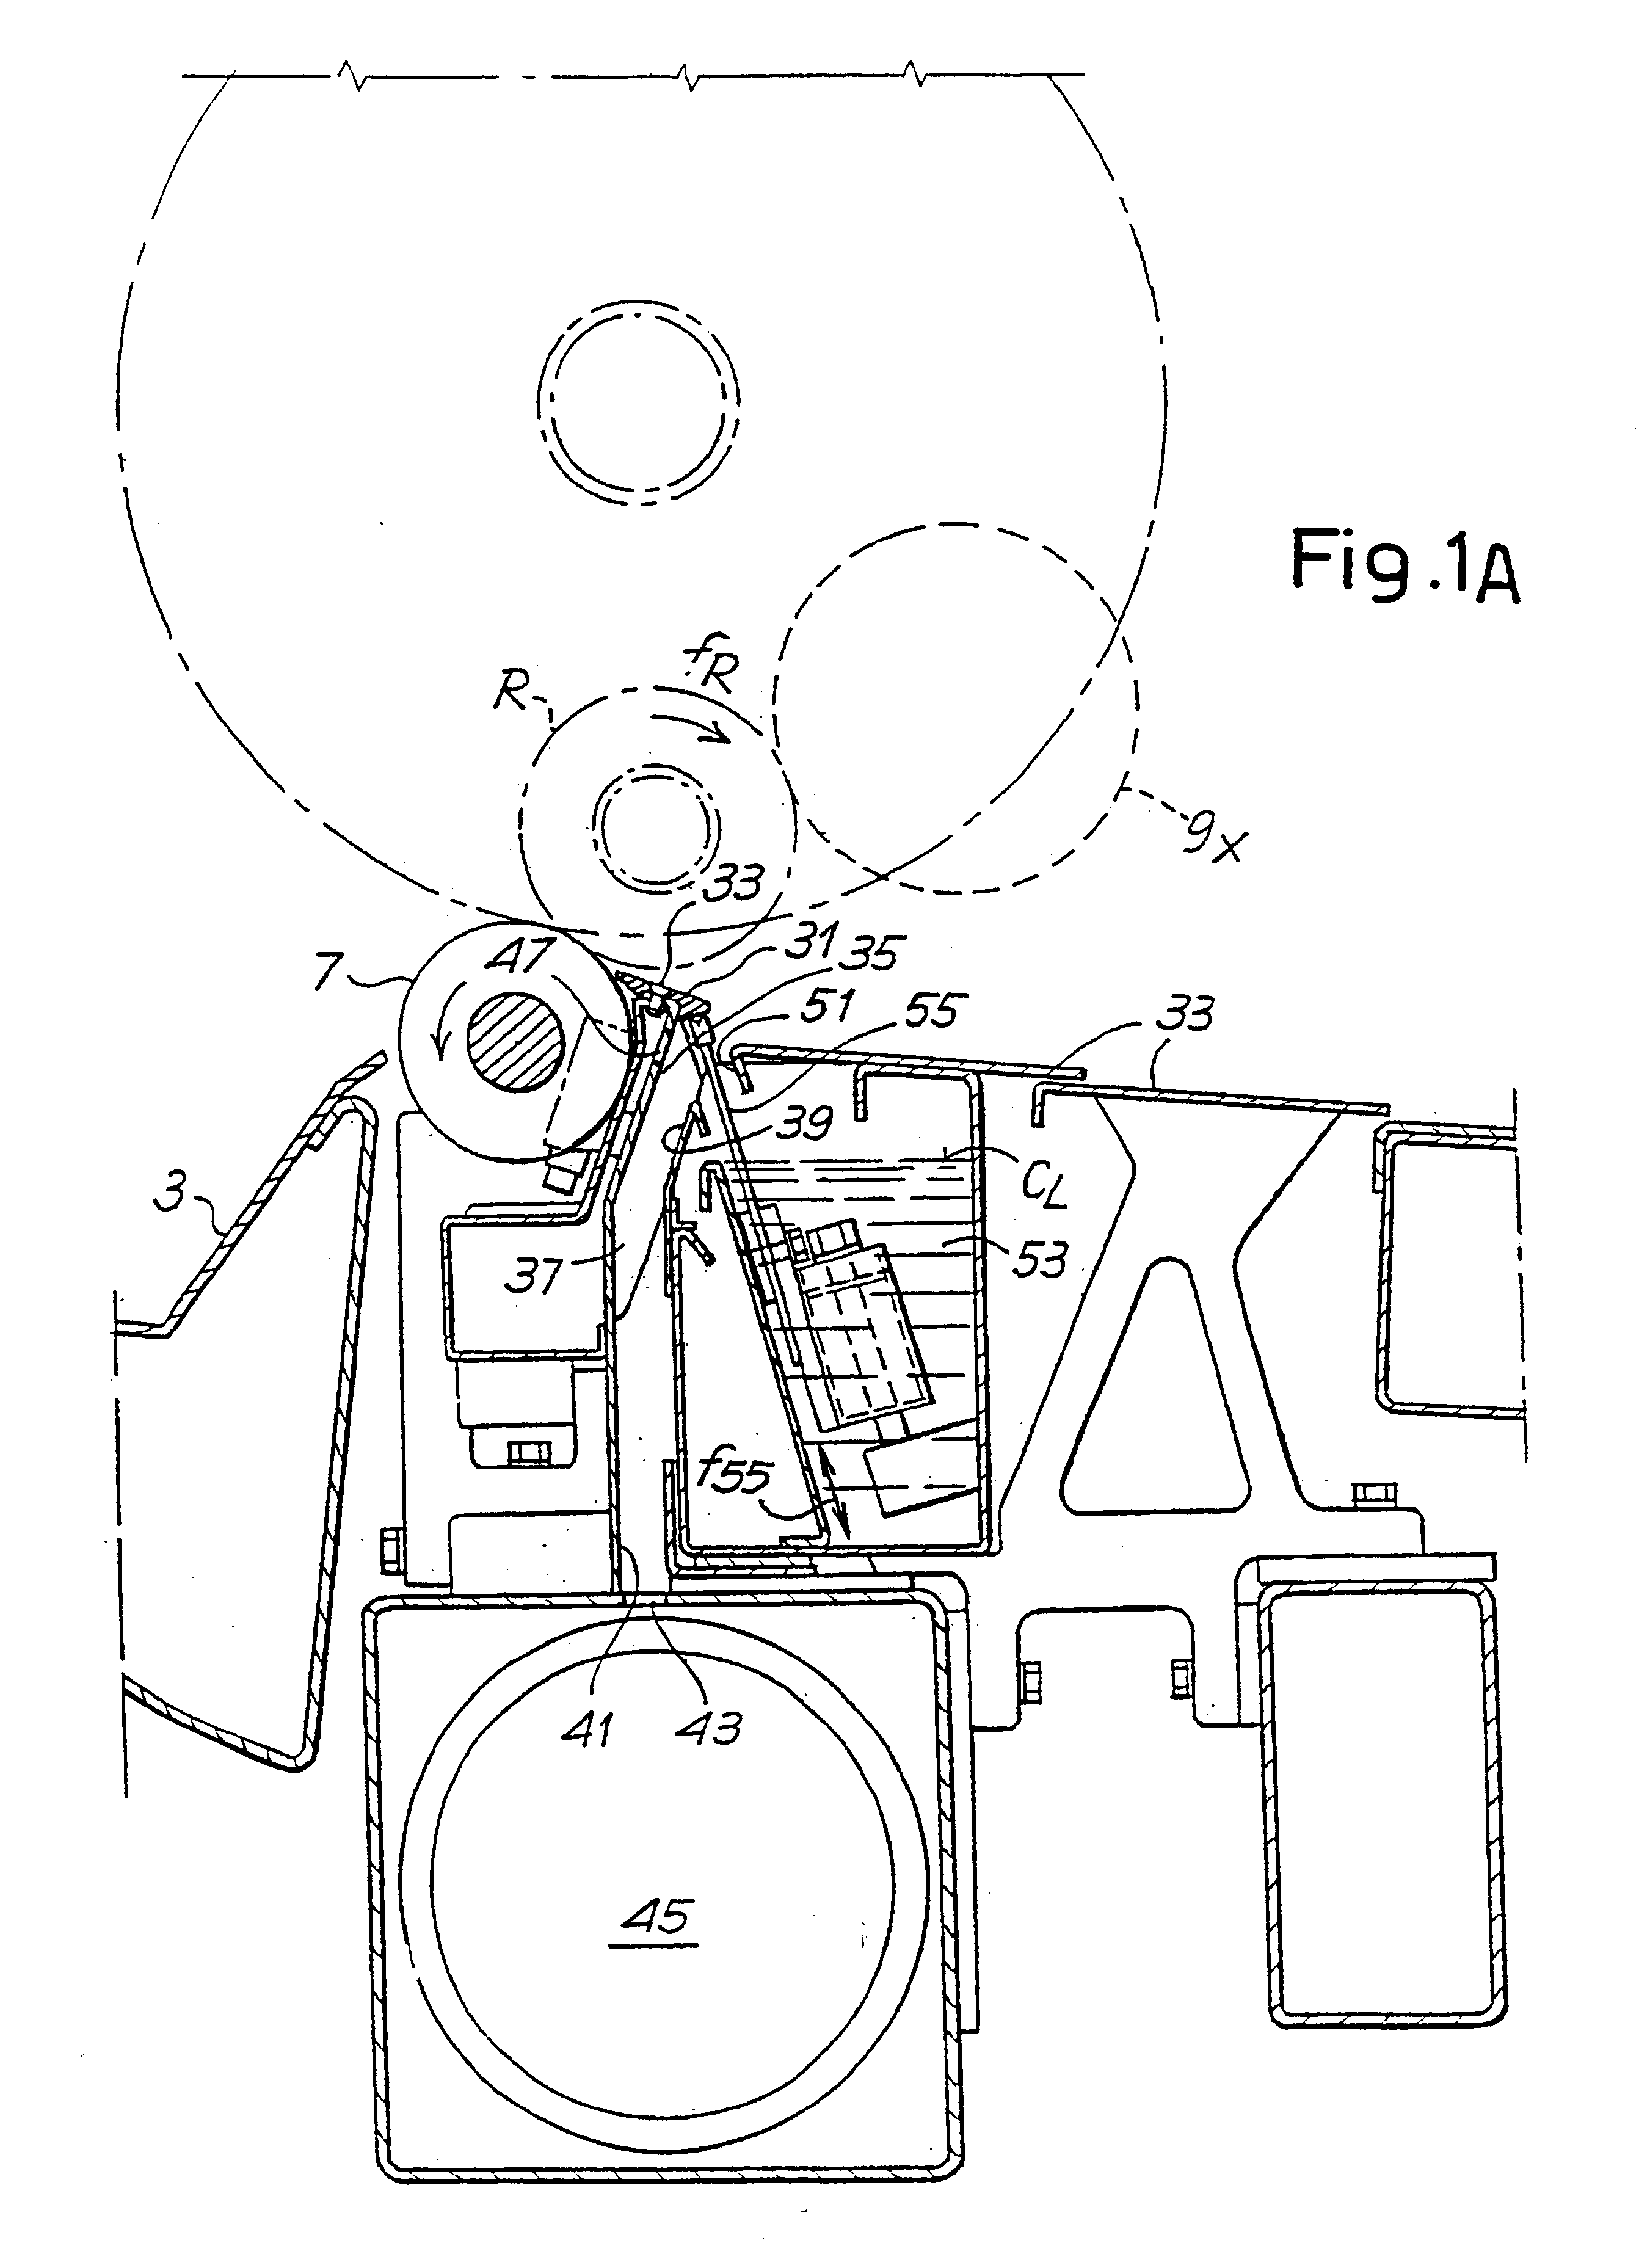 Device for gluing rolls of web material and associated method